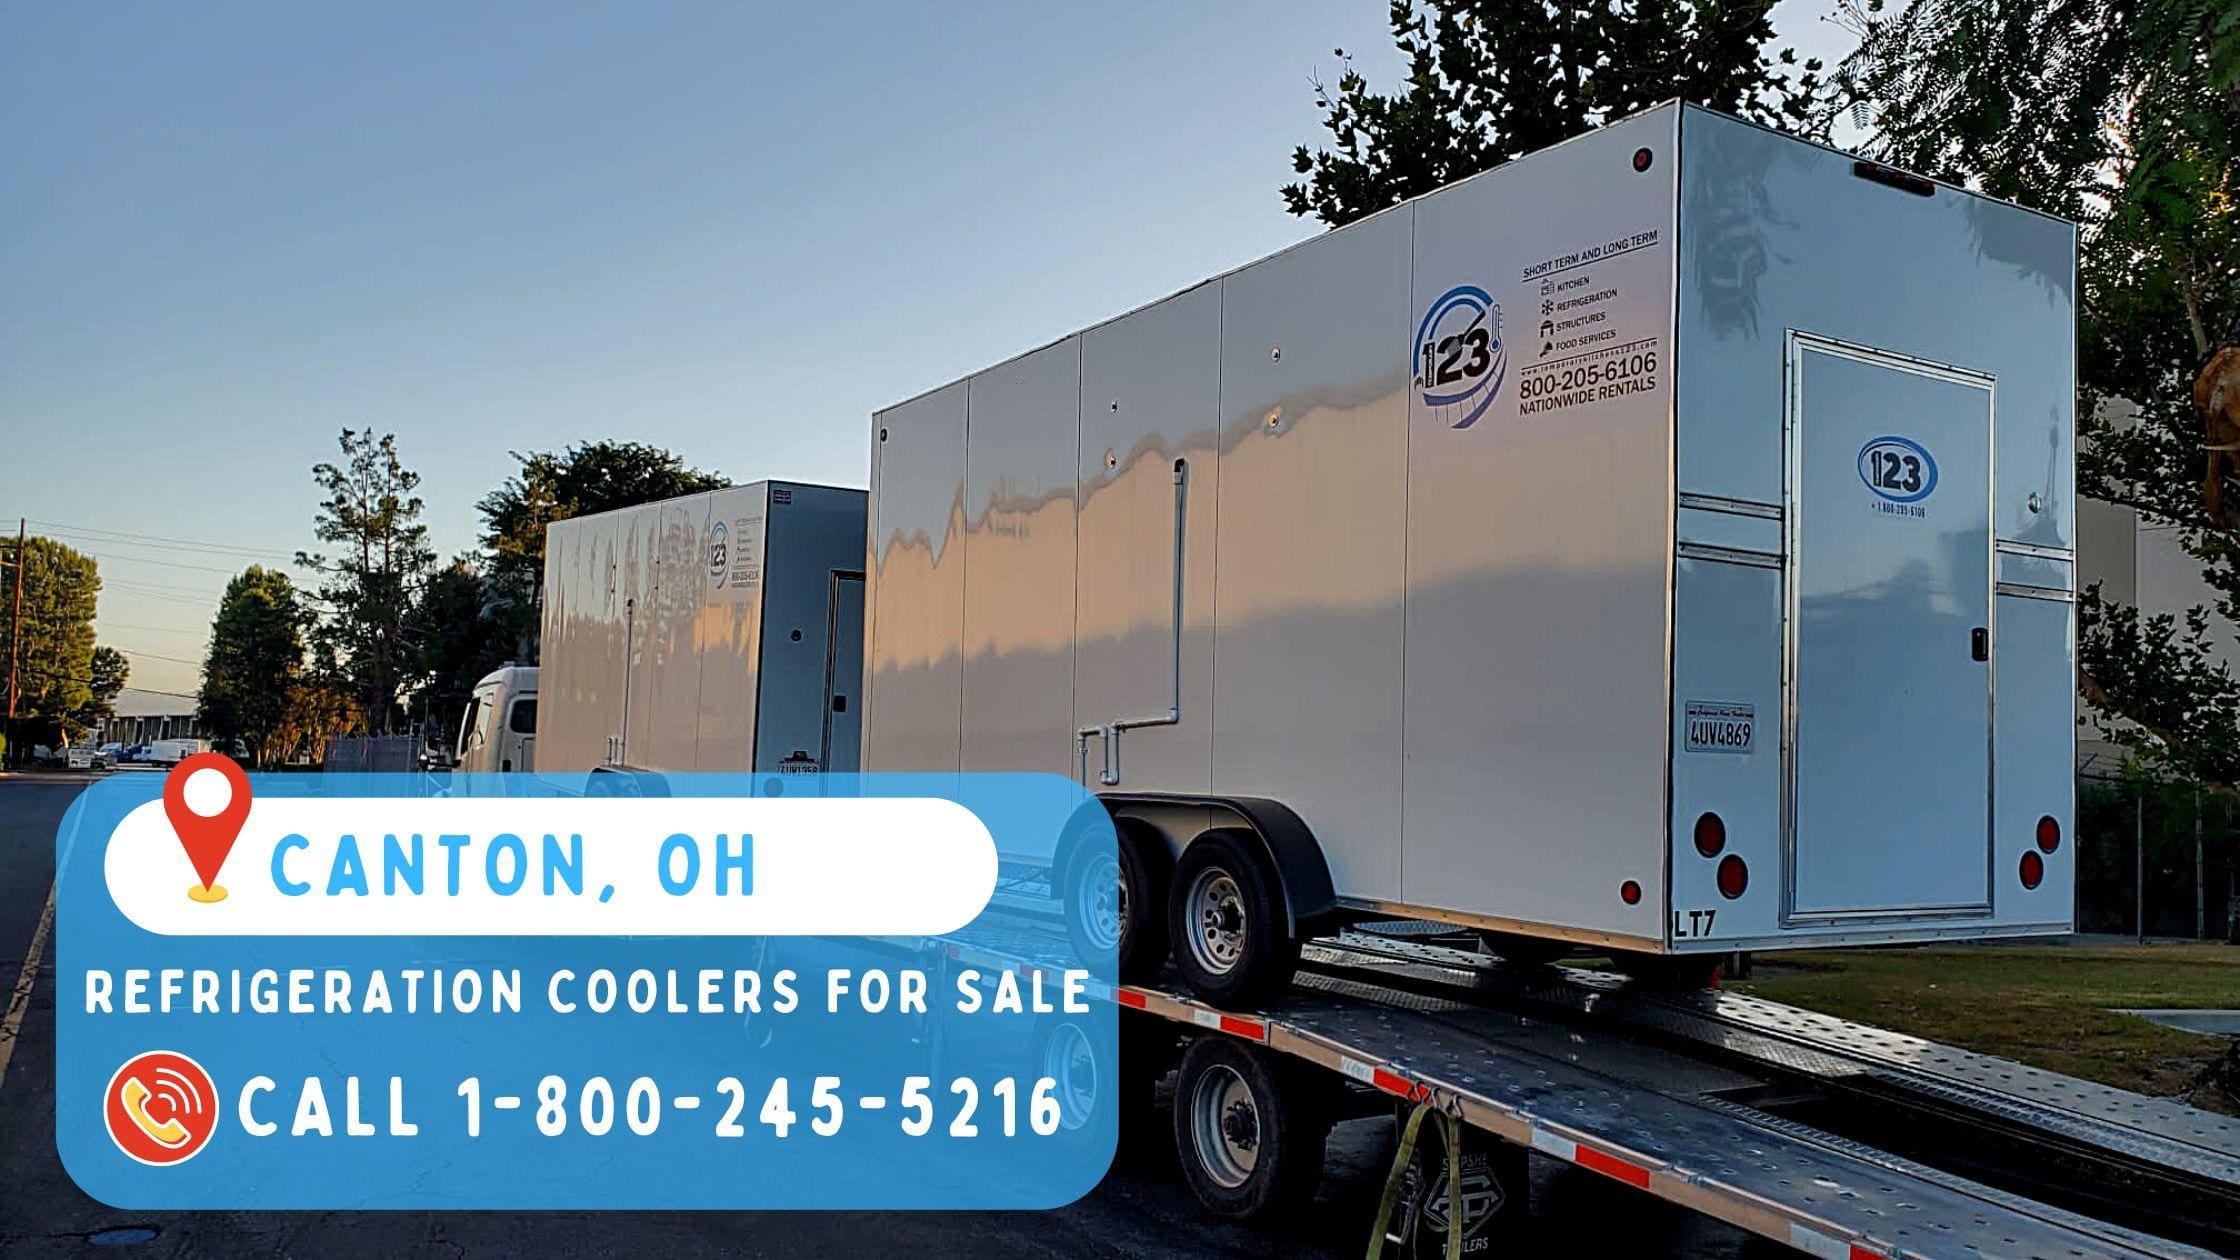 Refrigeration Coolers for Sale in Canton, OH